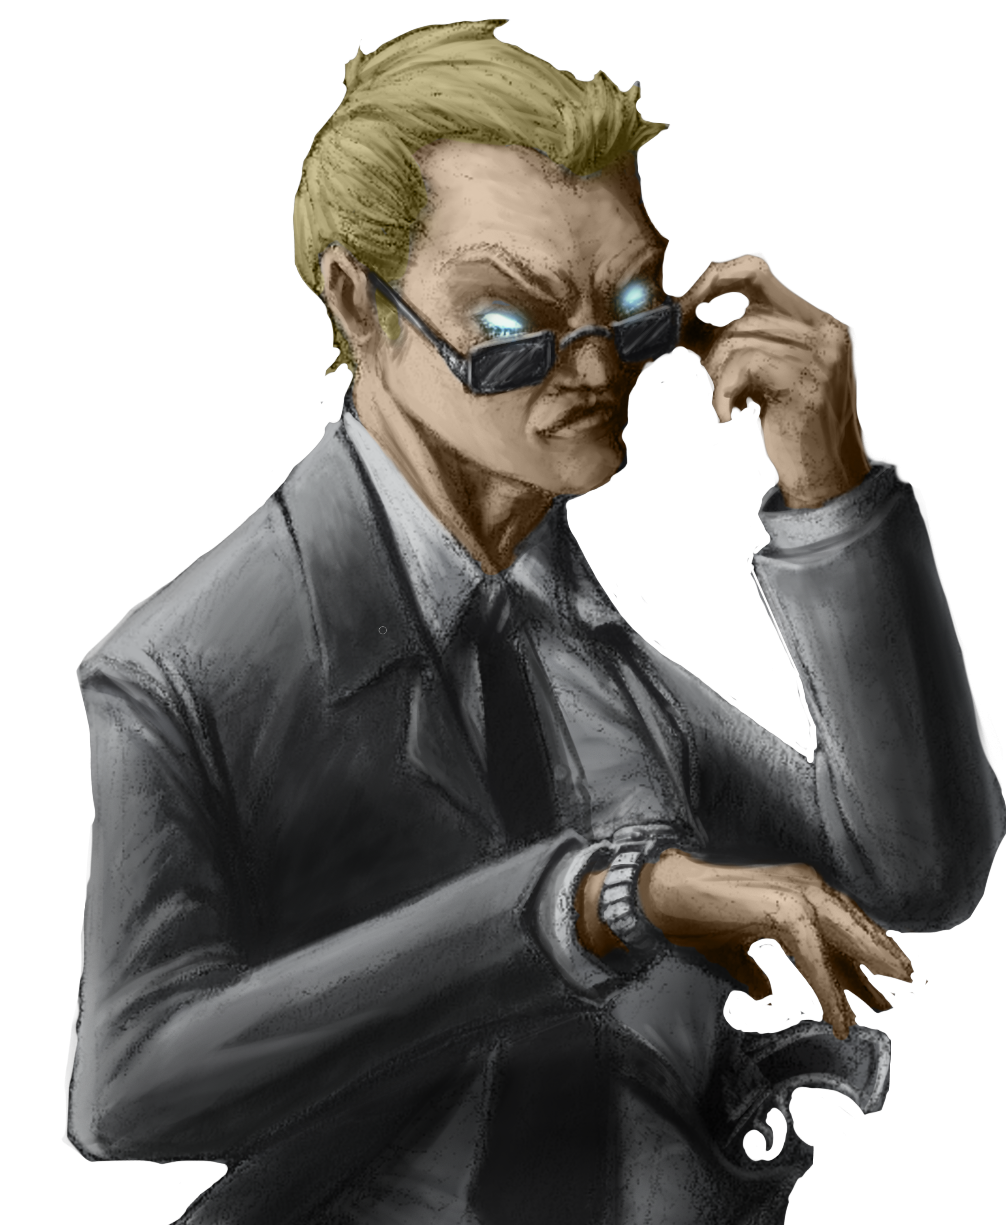 An illustration of a surly blonde man in a business suit. He is reaching for a firearm under his jacket and his eyes are glowing blue over the edge of his sunglasses. Illustration by artist Carter Doody.